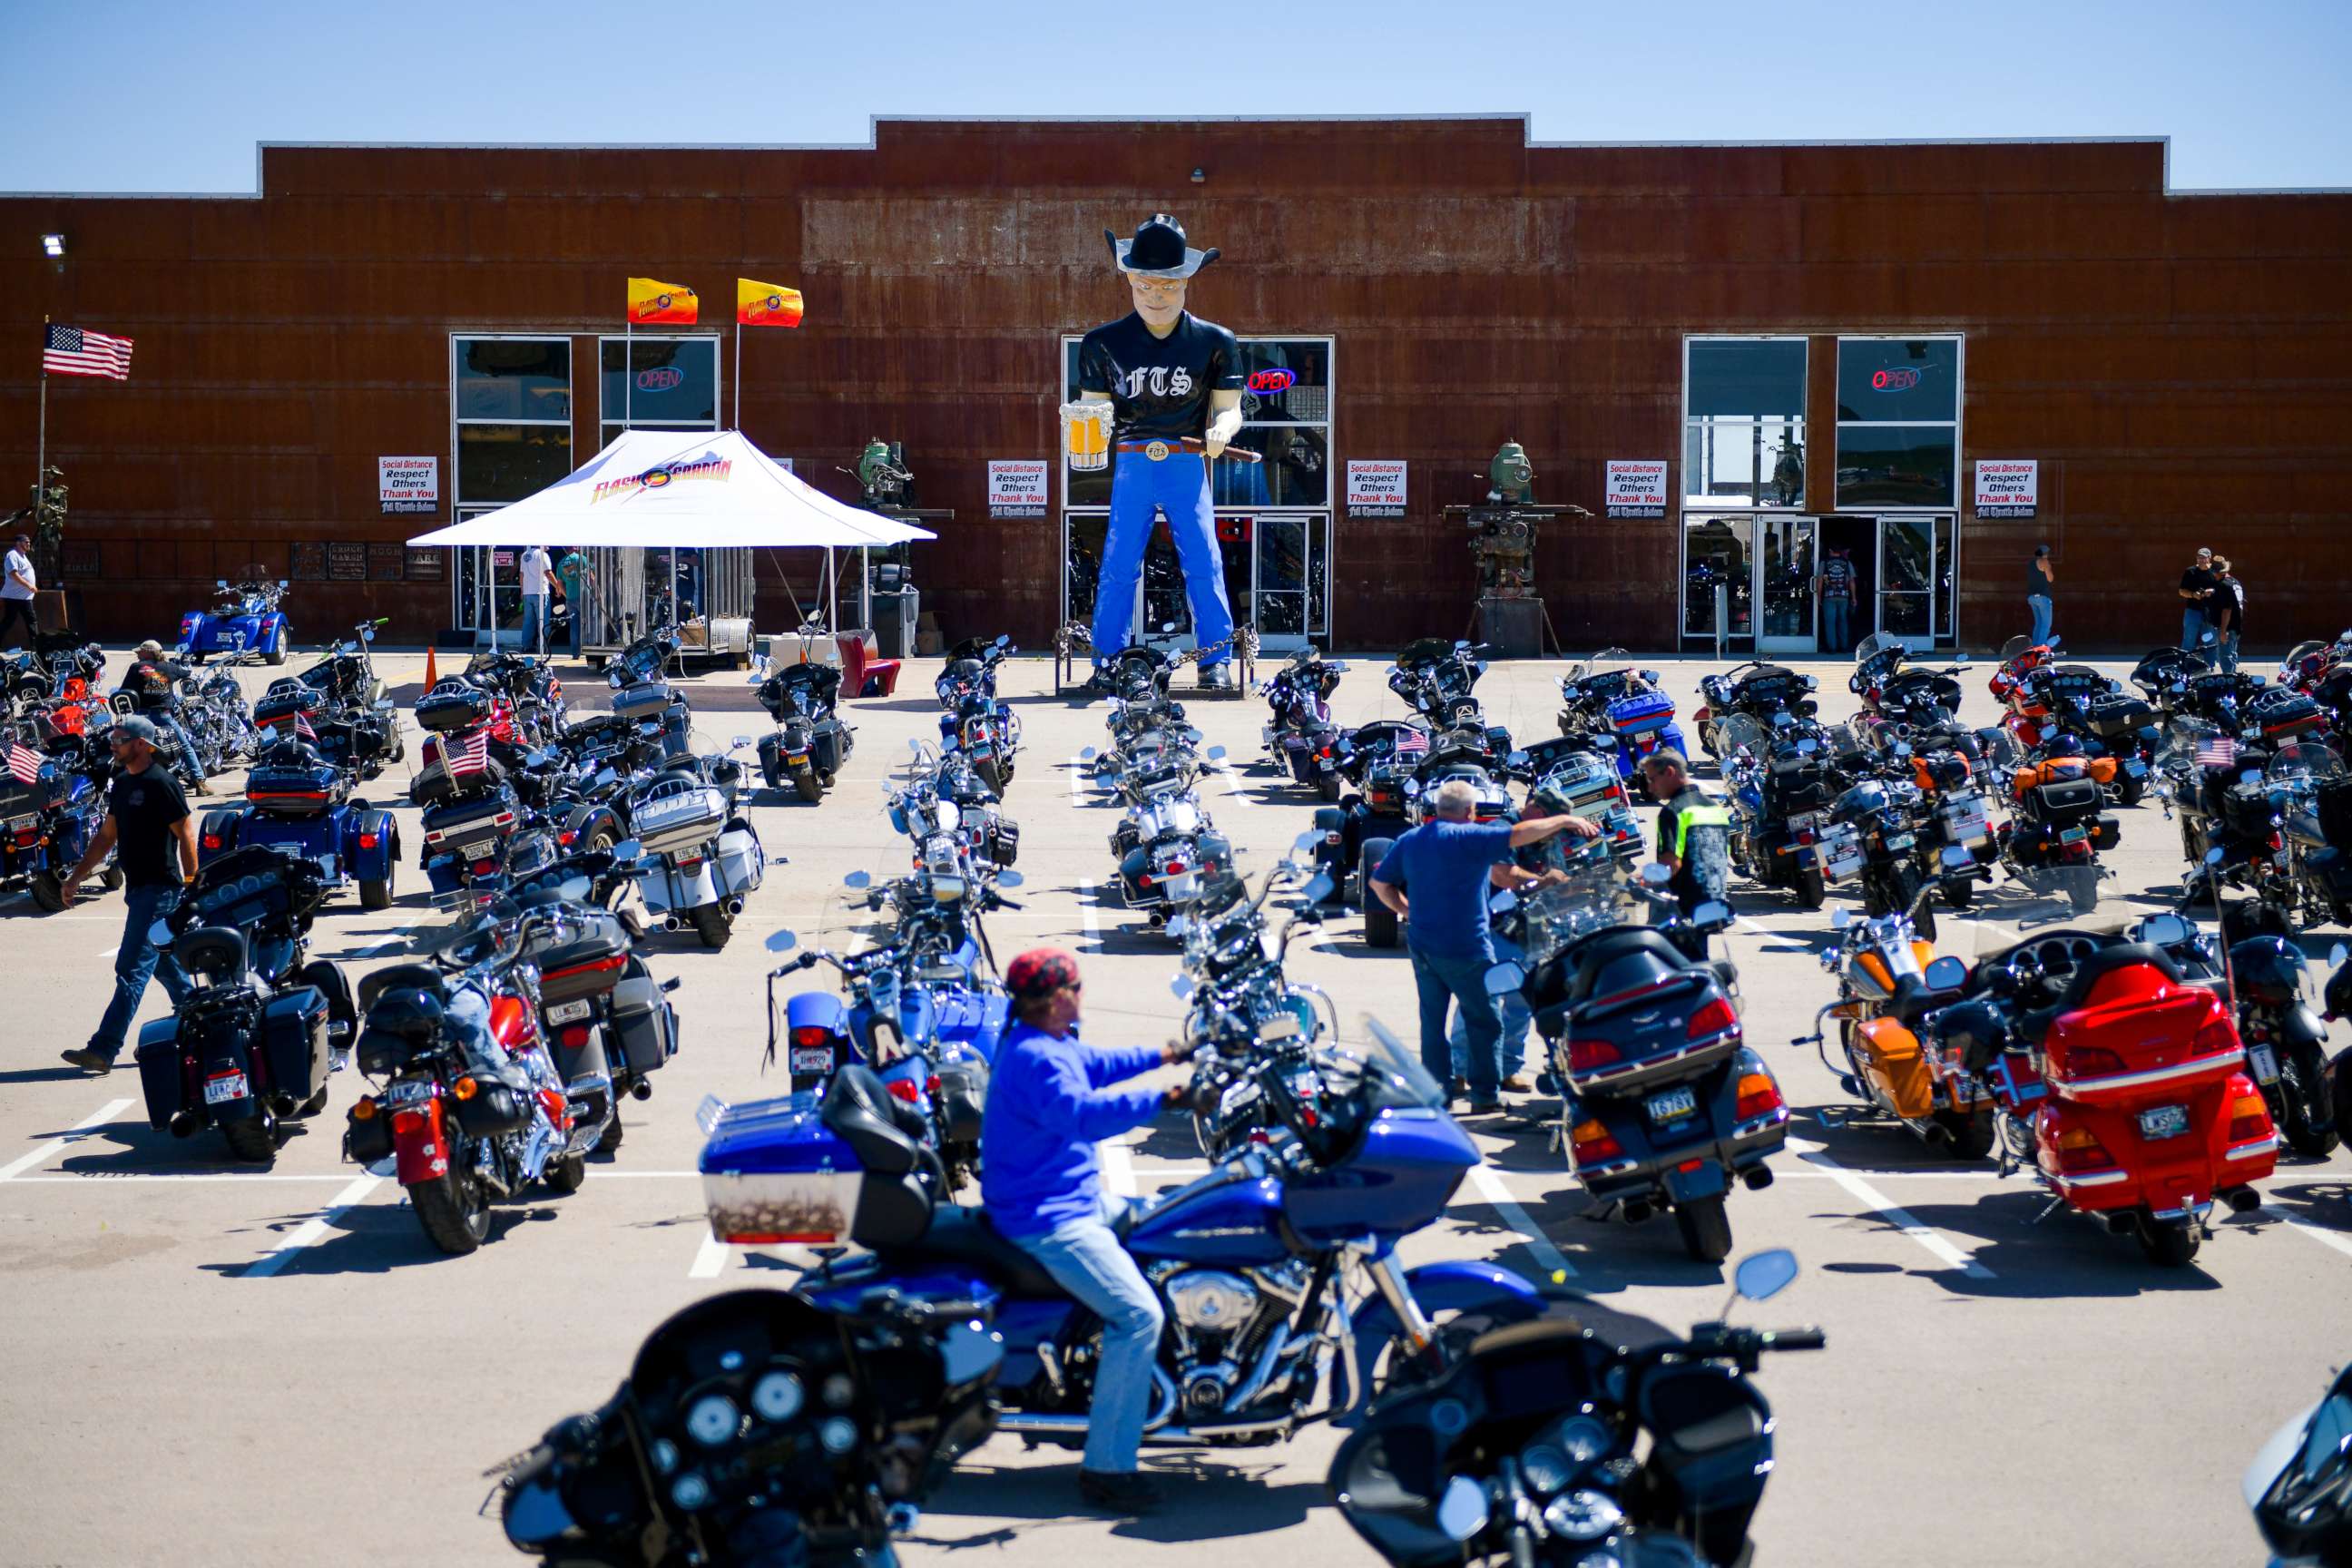 PHOTO: A motorcycle rider looks for parking outside the Full Throttle Saloon during the 80th Annual Sturgis Motorcycle Rally in Sturgis, South Dakota, Aug. 9, 2020.